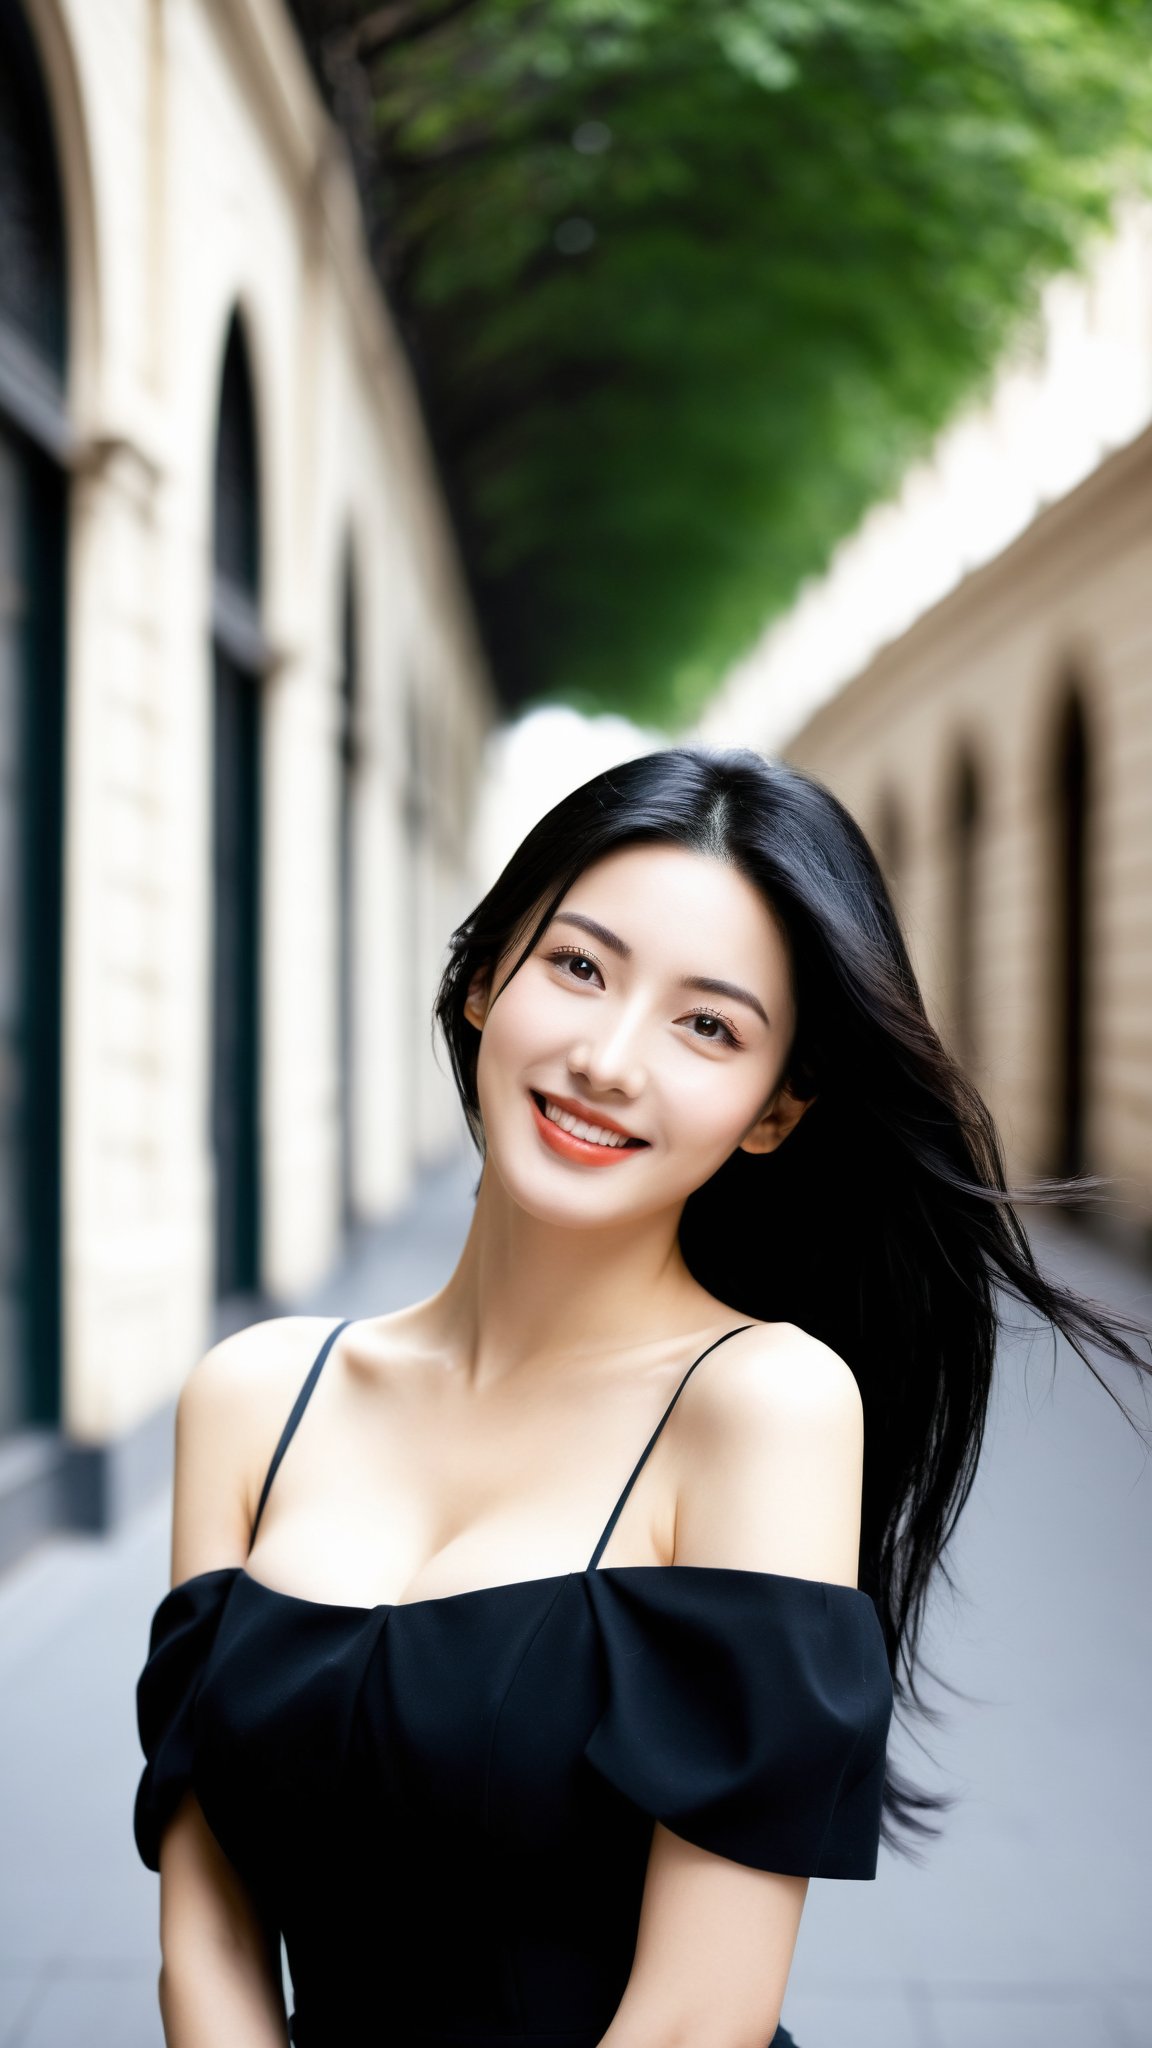 masterpiece, best quality, realistic, photo, real, incredibly_absurdres, Ultra HD,Affectionately looking at you,8K,UHD,in the city street,simple background, upper body, arms behind head,arms behind back , bust photo, a girl,She has black hair. The lines of her face are soft and smooth. Her skin is as fair as snow, soft and delicate, and her eyes are bright and bright, deep and mysterious, making people feel endless charm and appeal. The eyebrows are slender and graceful, the nose is straight and noble, the lips are rosy and seductive, and the slightly raised angle reveals confidence and elegance. Her facial features are delicate and three-dimensional, with well-defined contours, like a fine painting or a finely carved work of art. The overall feeling is gentle, elegant, noble and full of charm.masterpiece, best quality, realistic, photo, real, absurdres, incredibly_absurdres, huge_filesize, bust, girl, kawaii, adorable girl, bishoujo, ojousama, idol, student, long hair, black hair, beautiful detailed eyes, looking at viewer, seductive smile, black eyes, large breasts, arms behind back ,